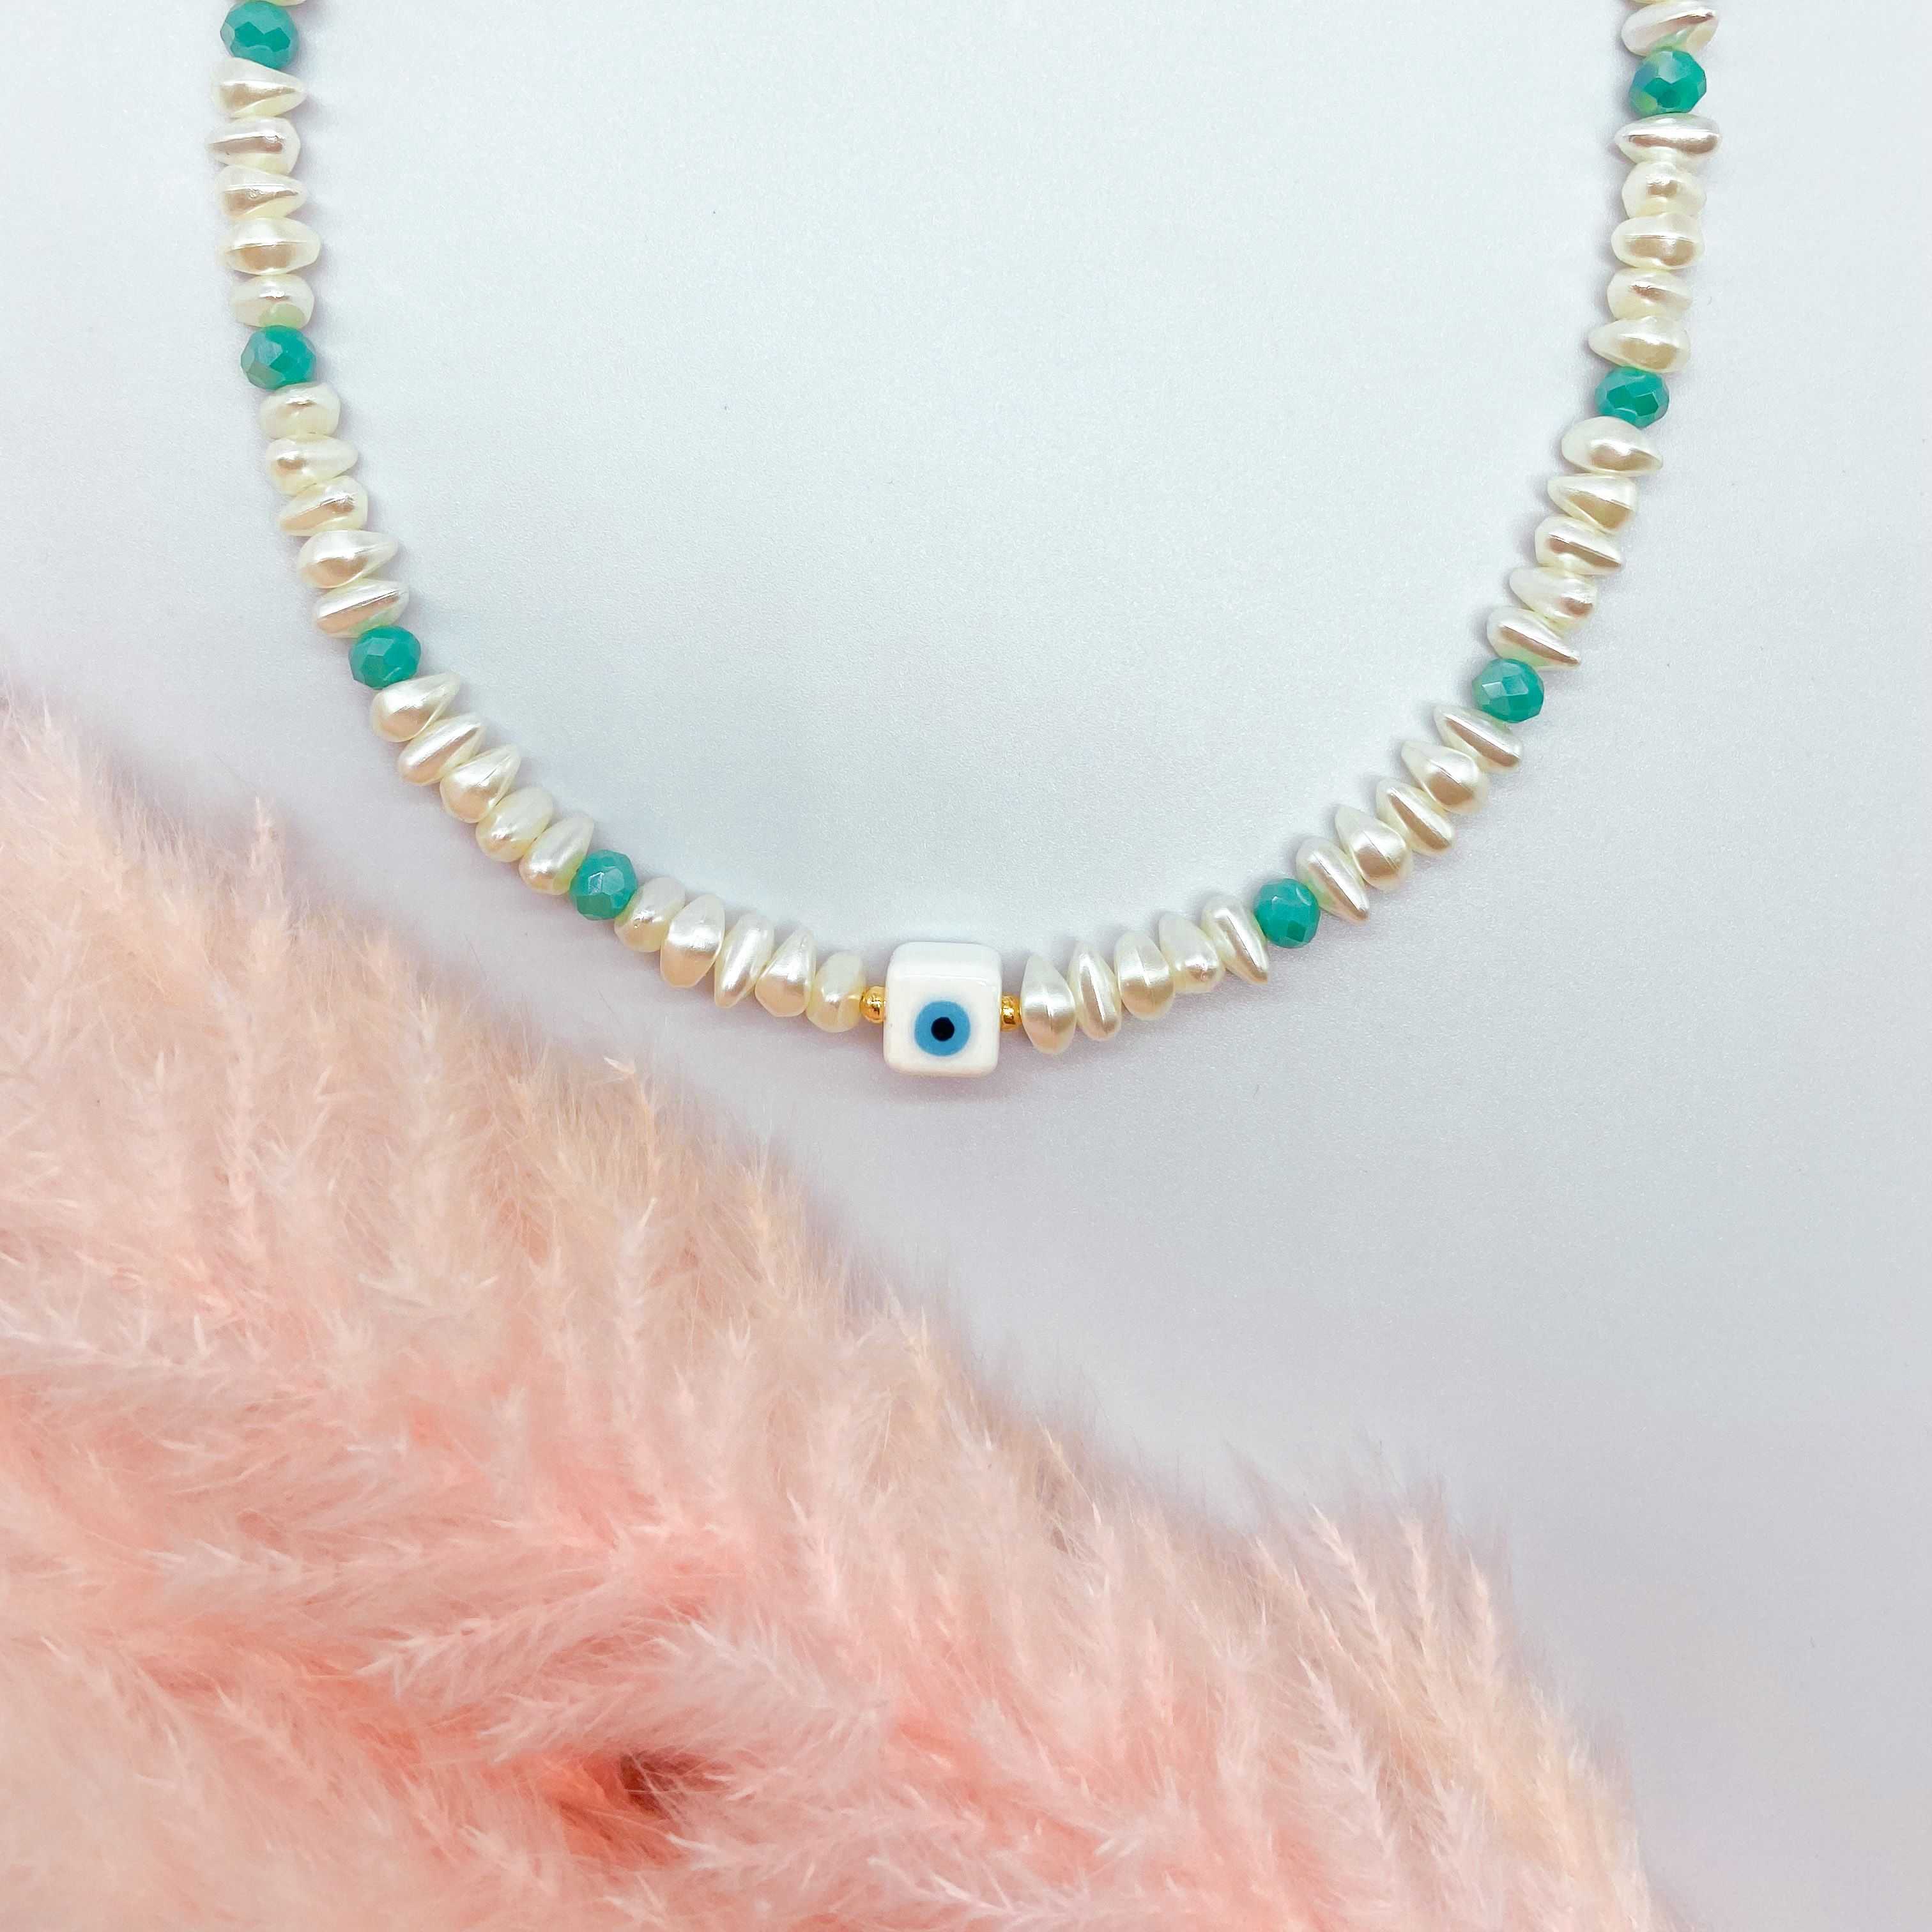 FLORES NECKLACE - WHITE & TURQUOISE 